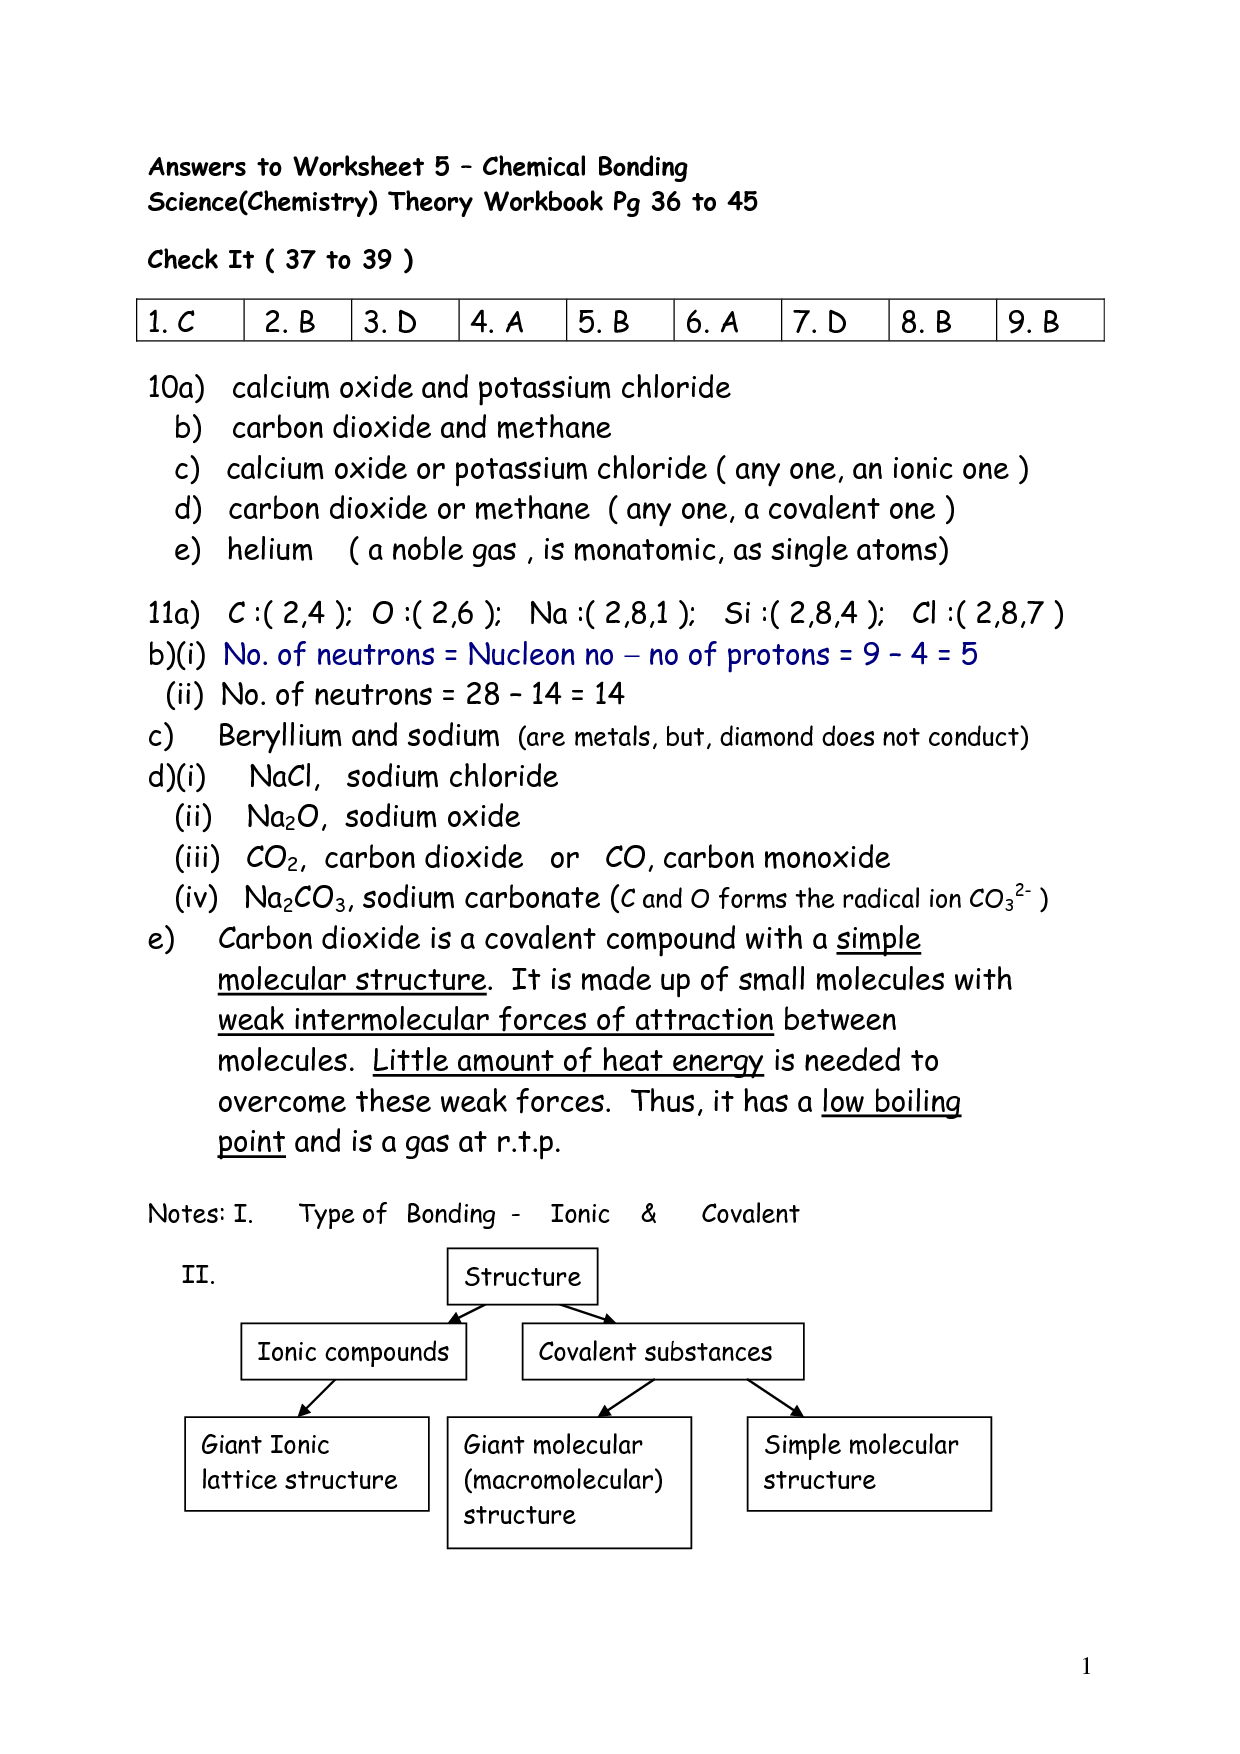 17-best-images-of-ionic-compounds-worksheet-answer-key-ionic-compound-worksheet-1-answer-key